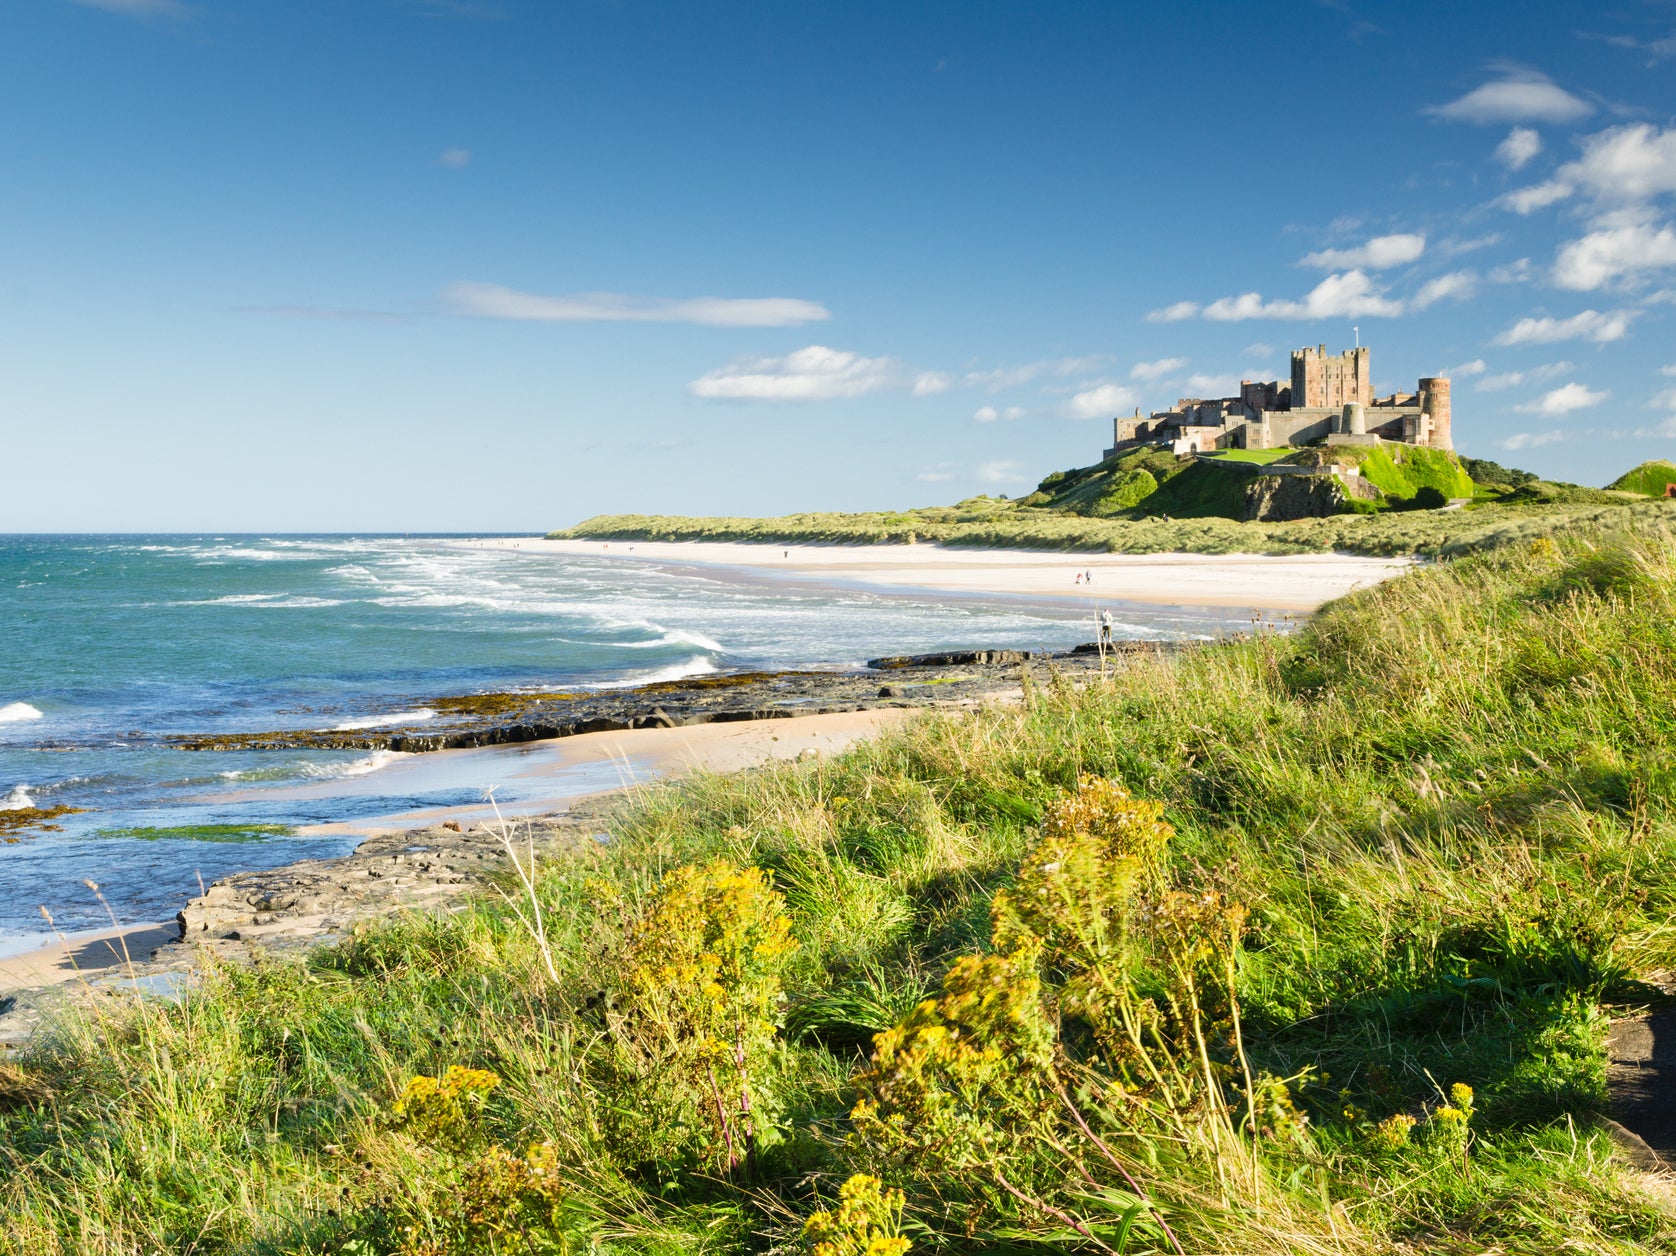 The coastal village boasts a castle, sandy beach and picturesque setting